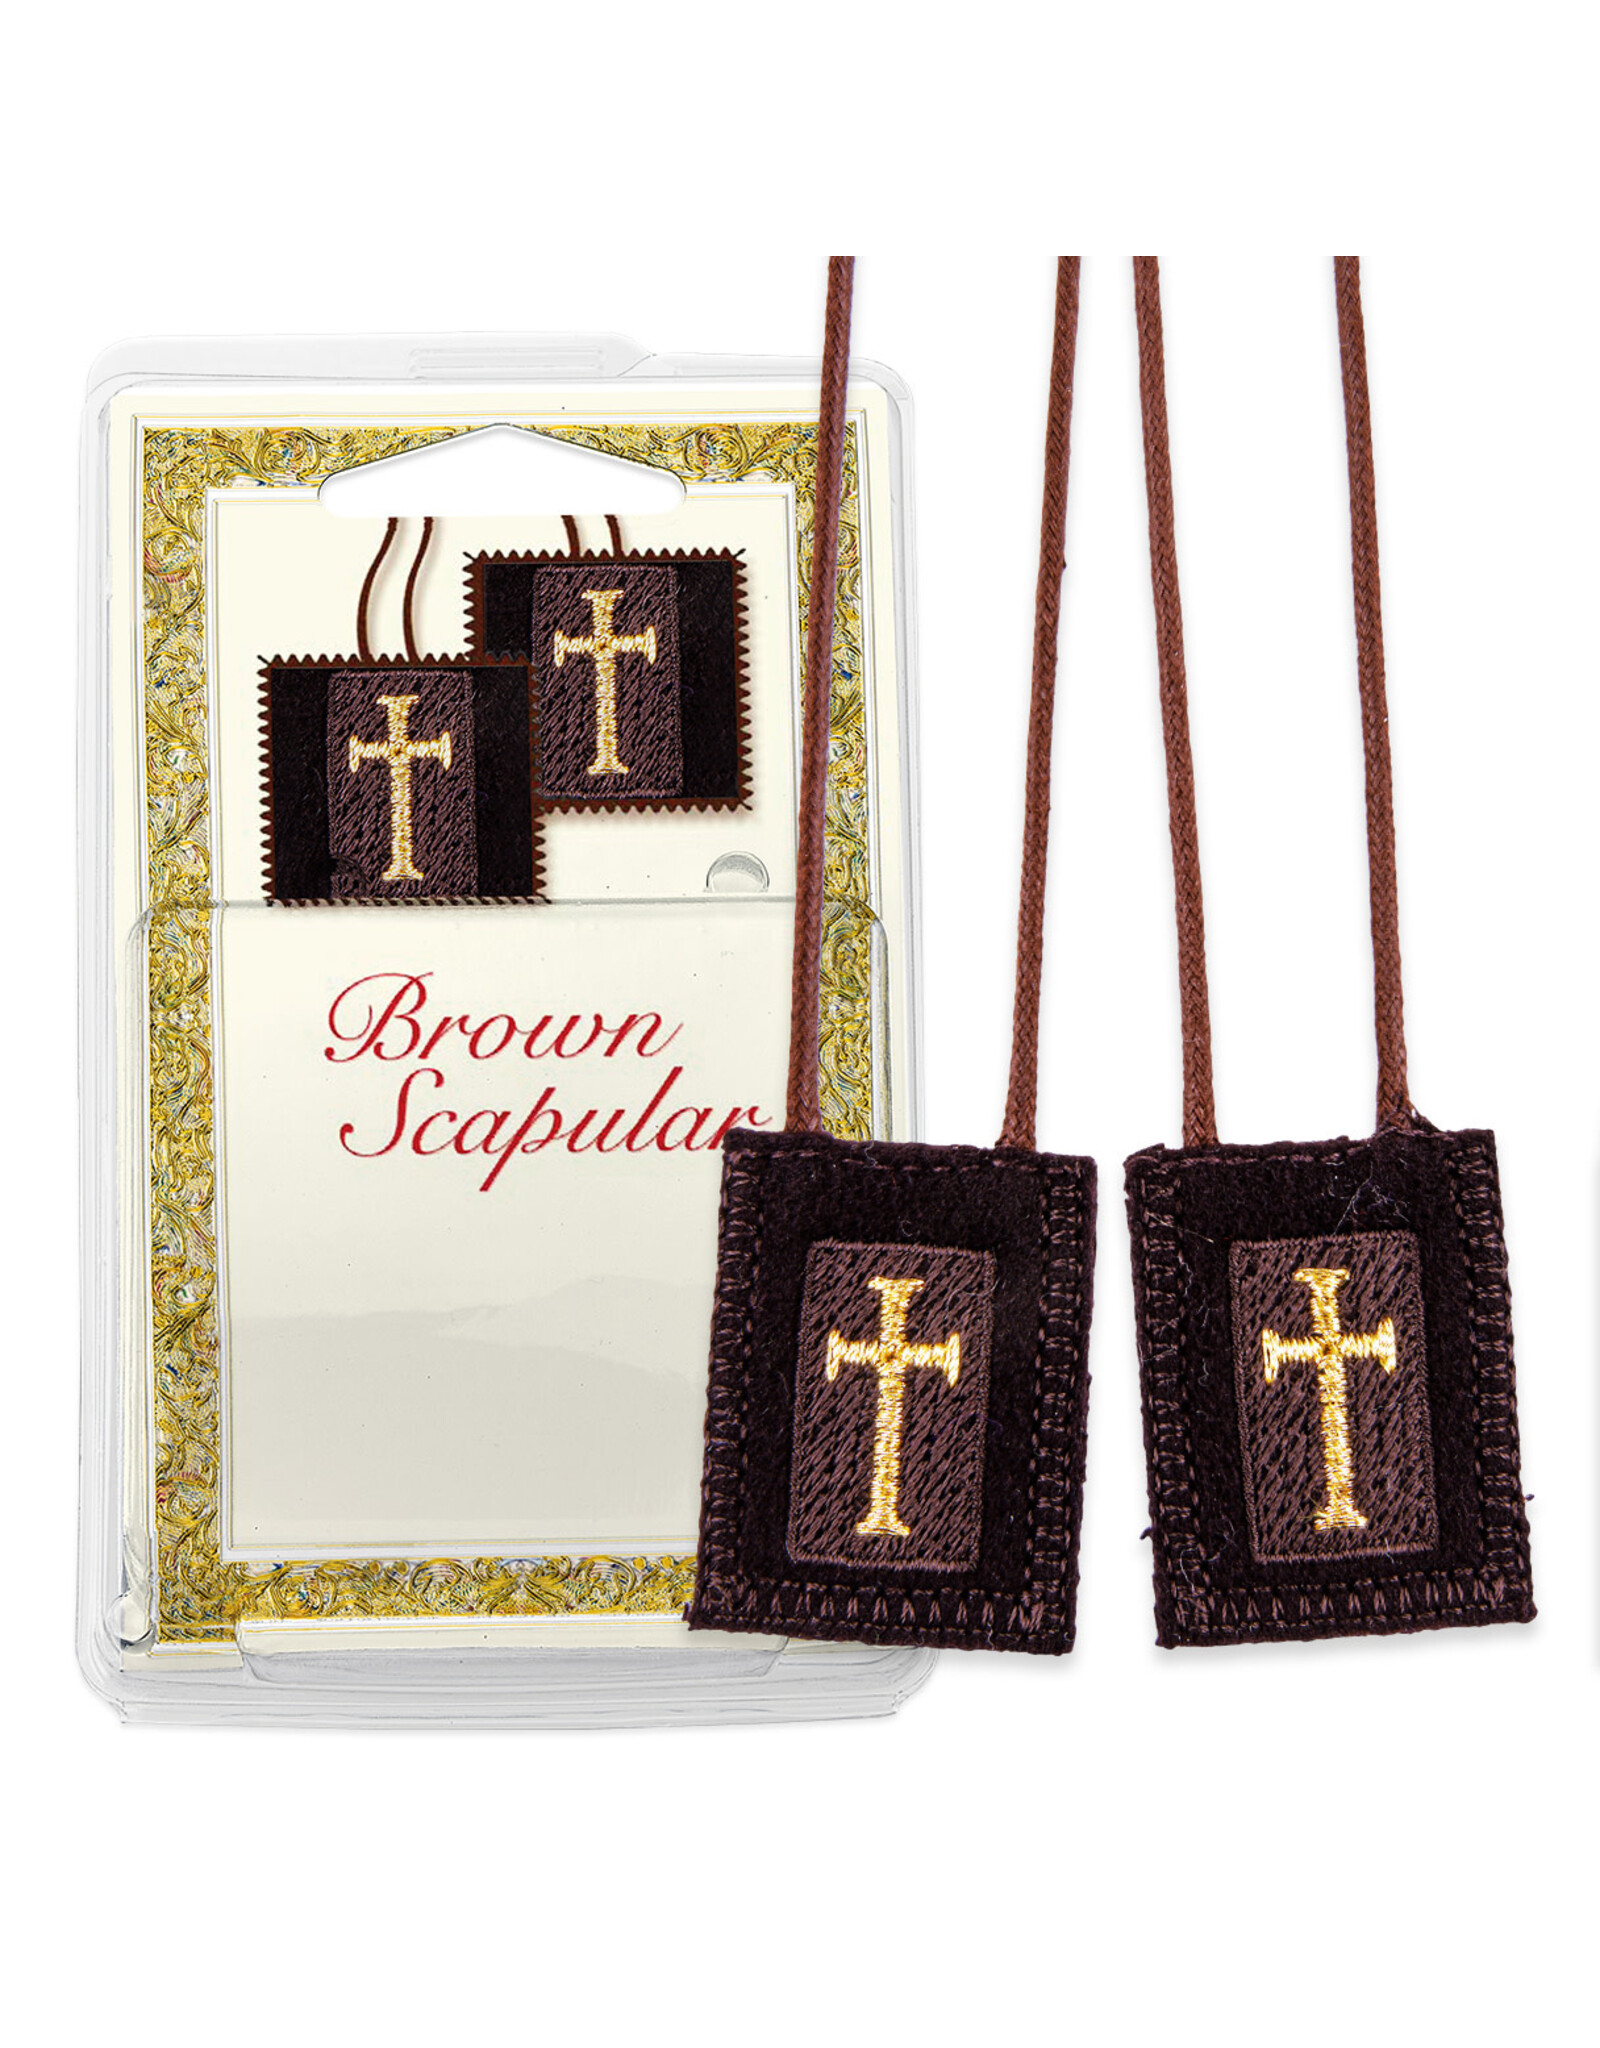 Hirten Scapular - Brown Wool with Gold Embroidered Latin Crosses